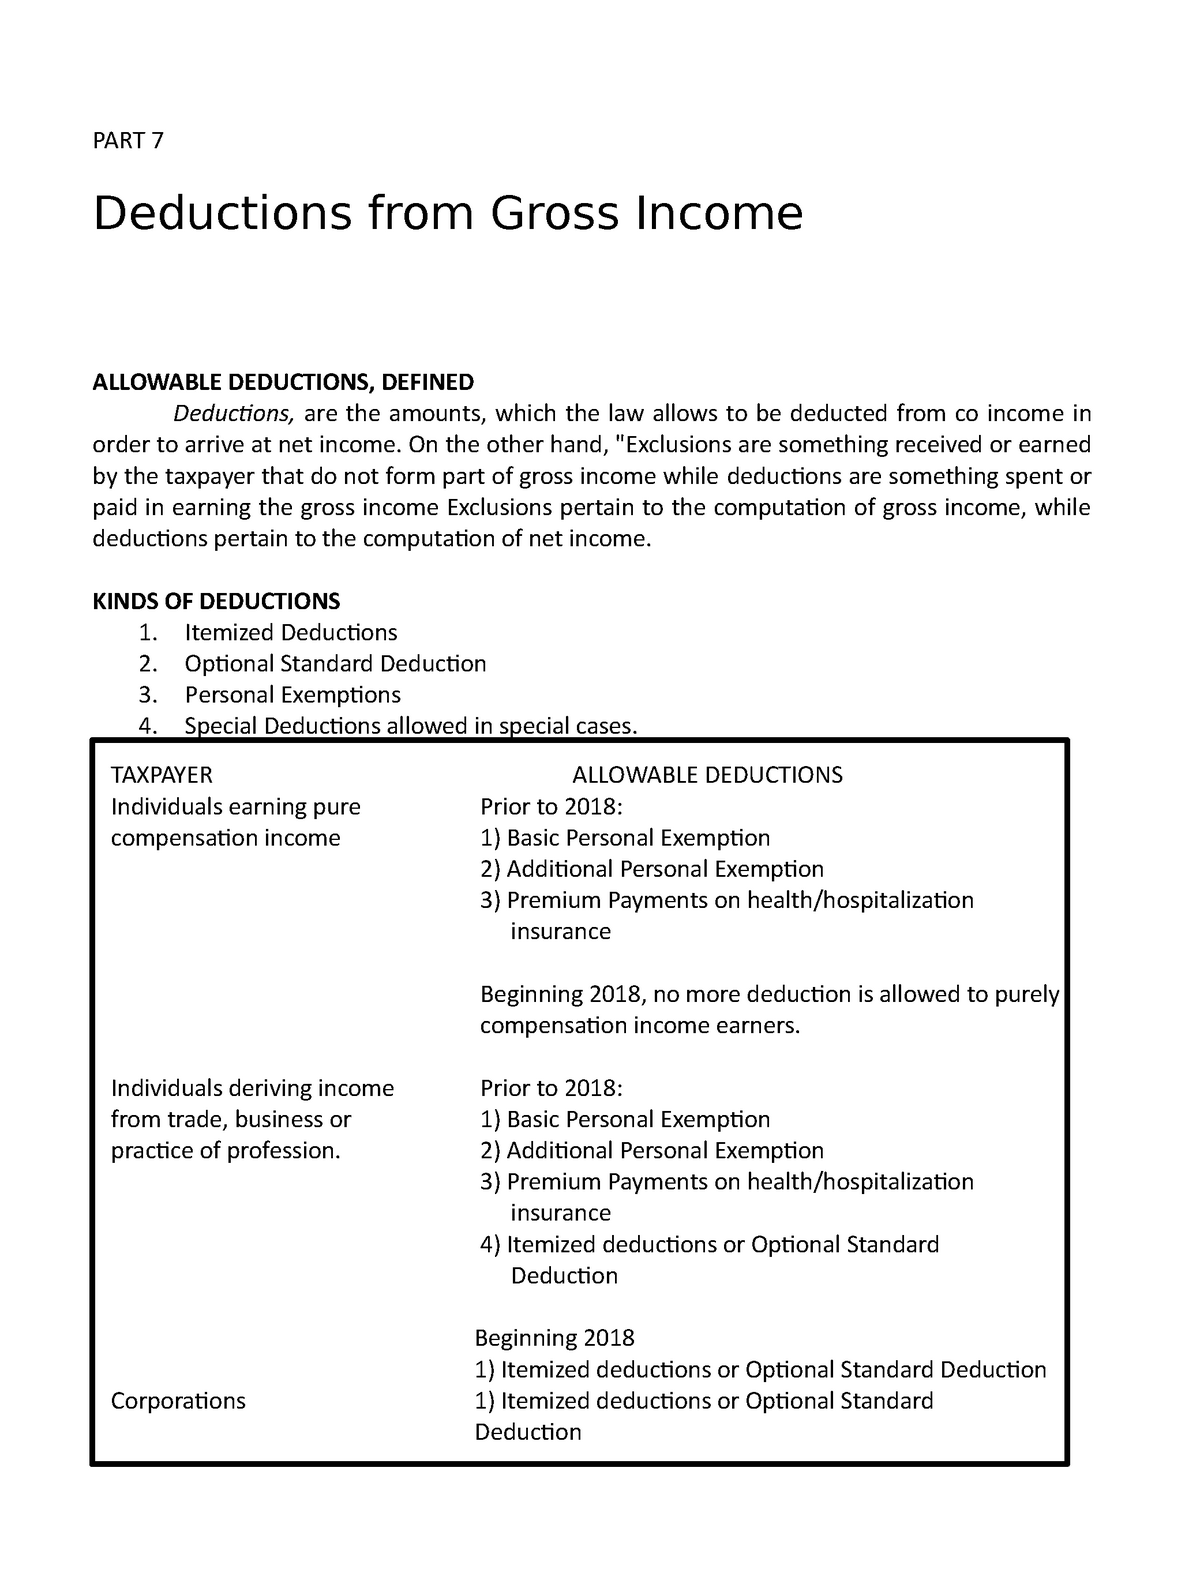 07 Deductions from Gross Income  PART 7 Deductions from Gross Income